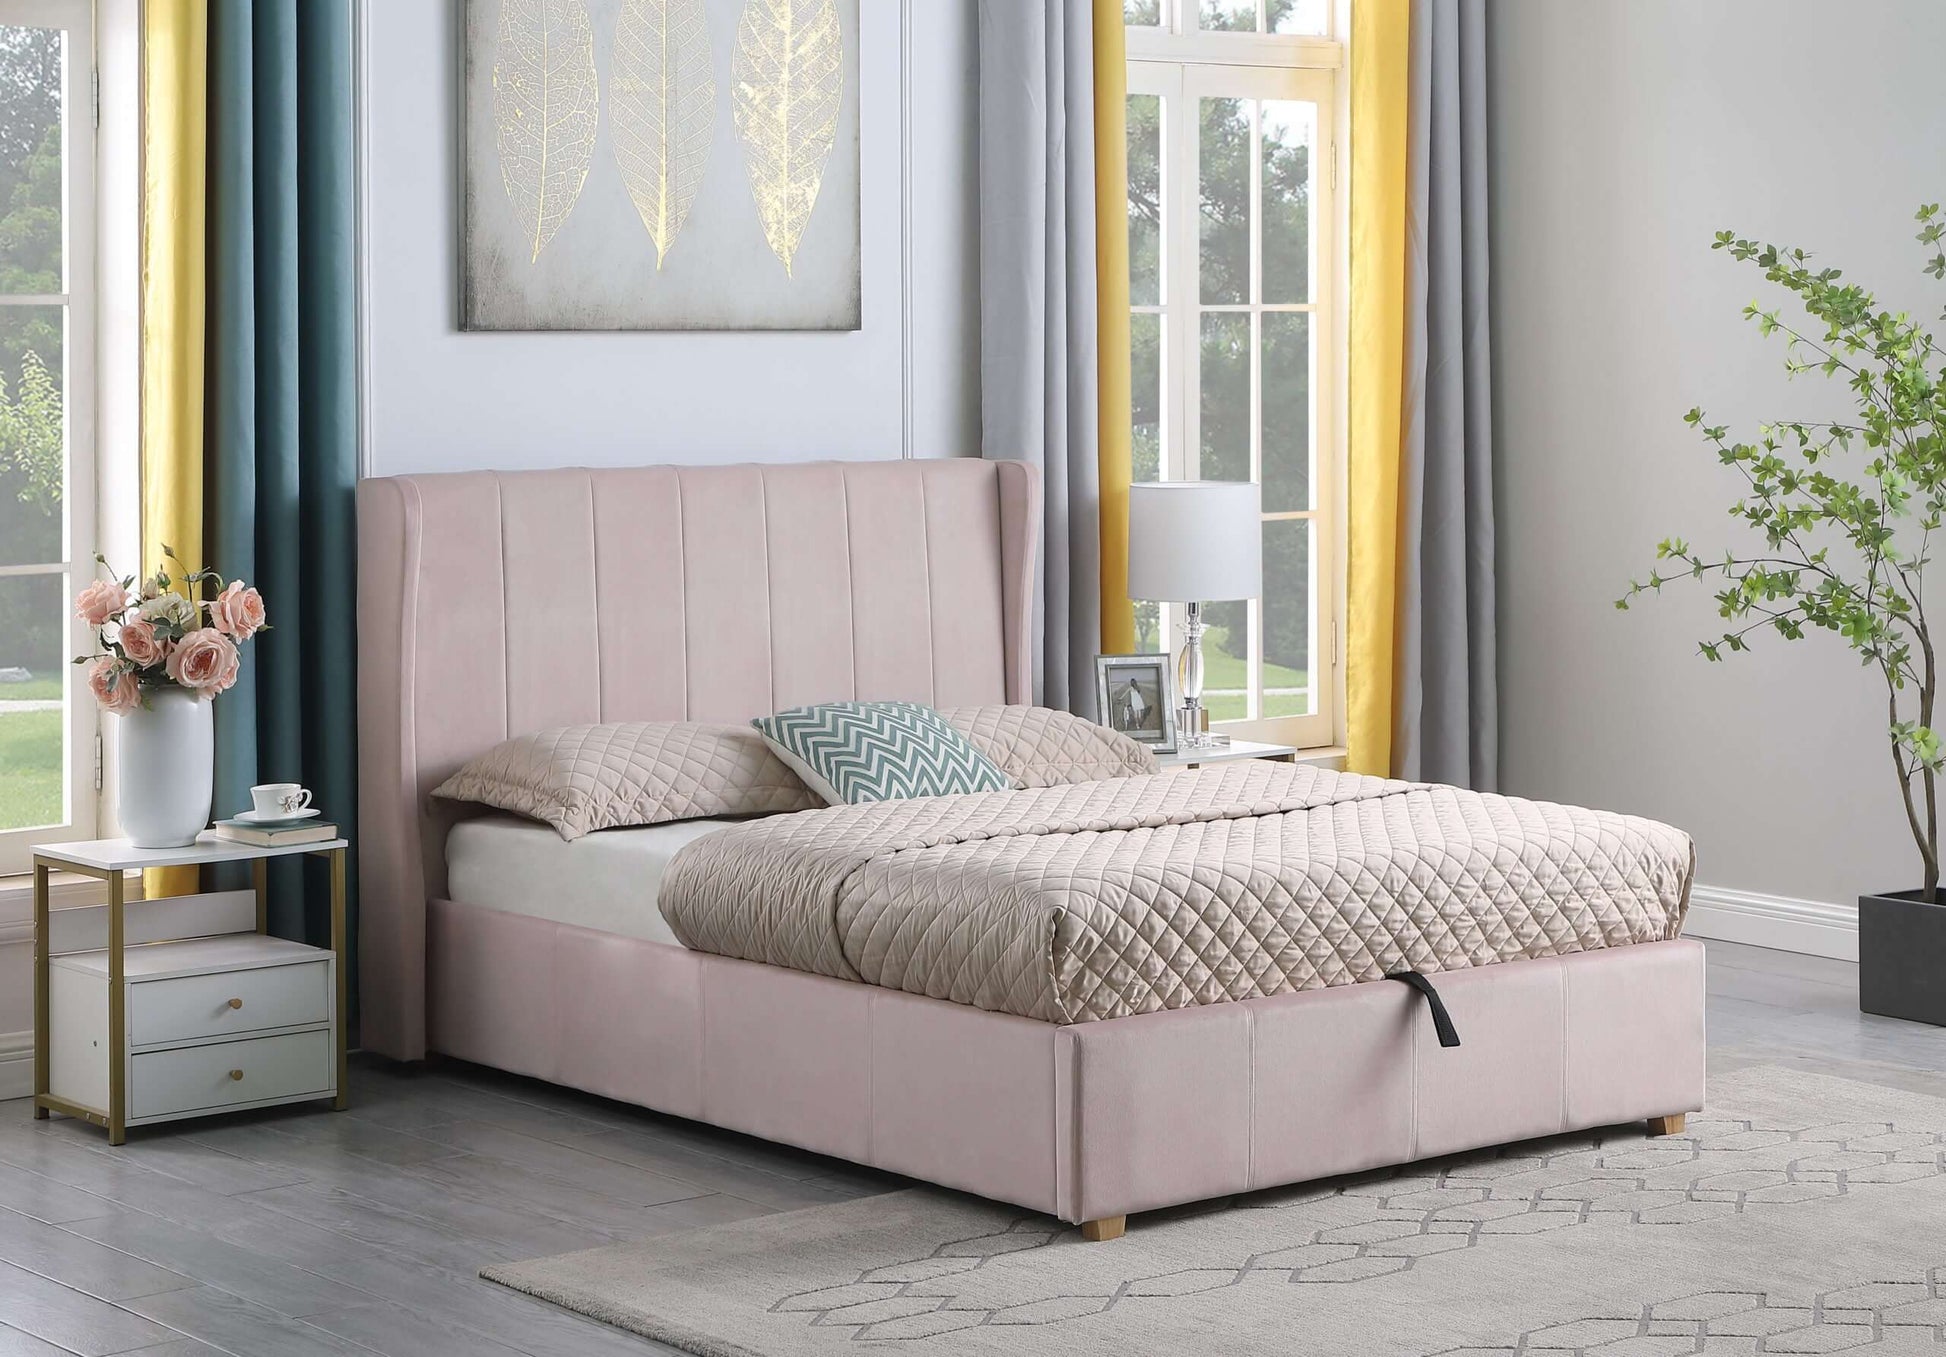 Amelia Plus 5' Storage Bed - Pink Velvet Fabric - The Right Buy Store